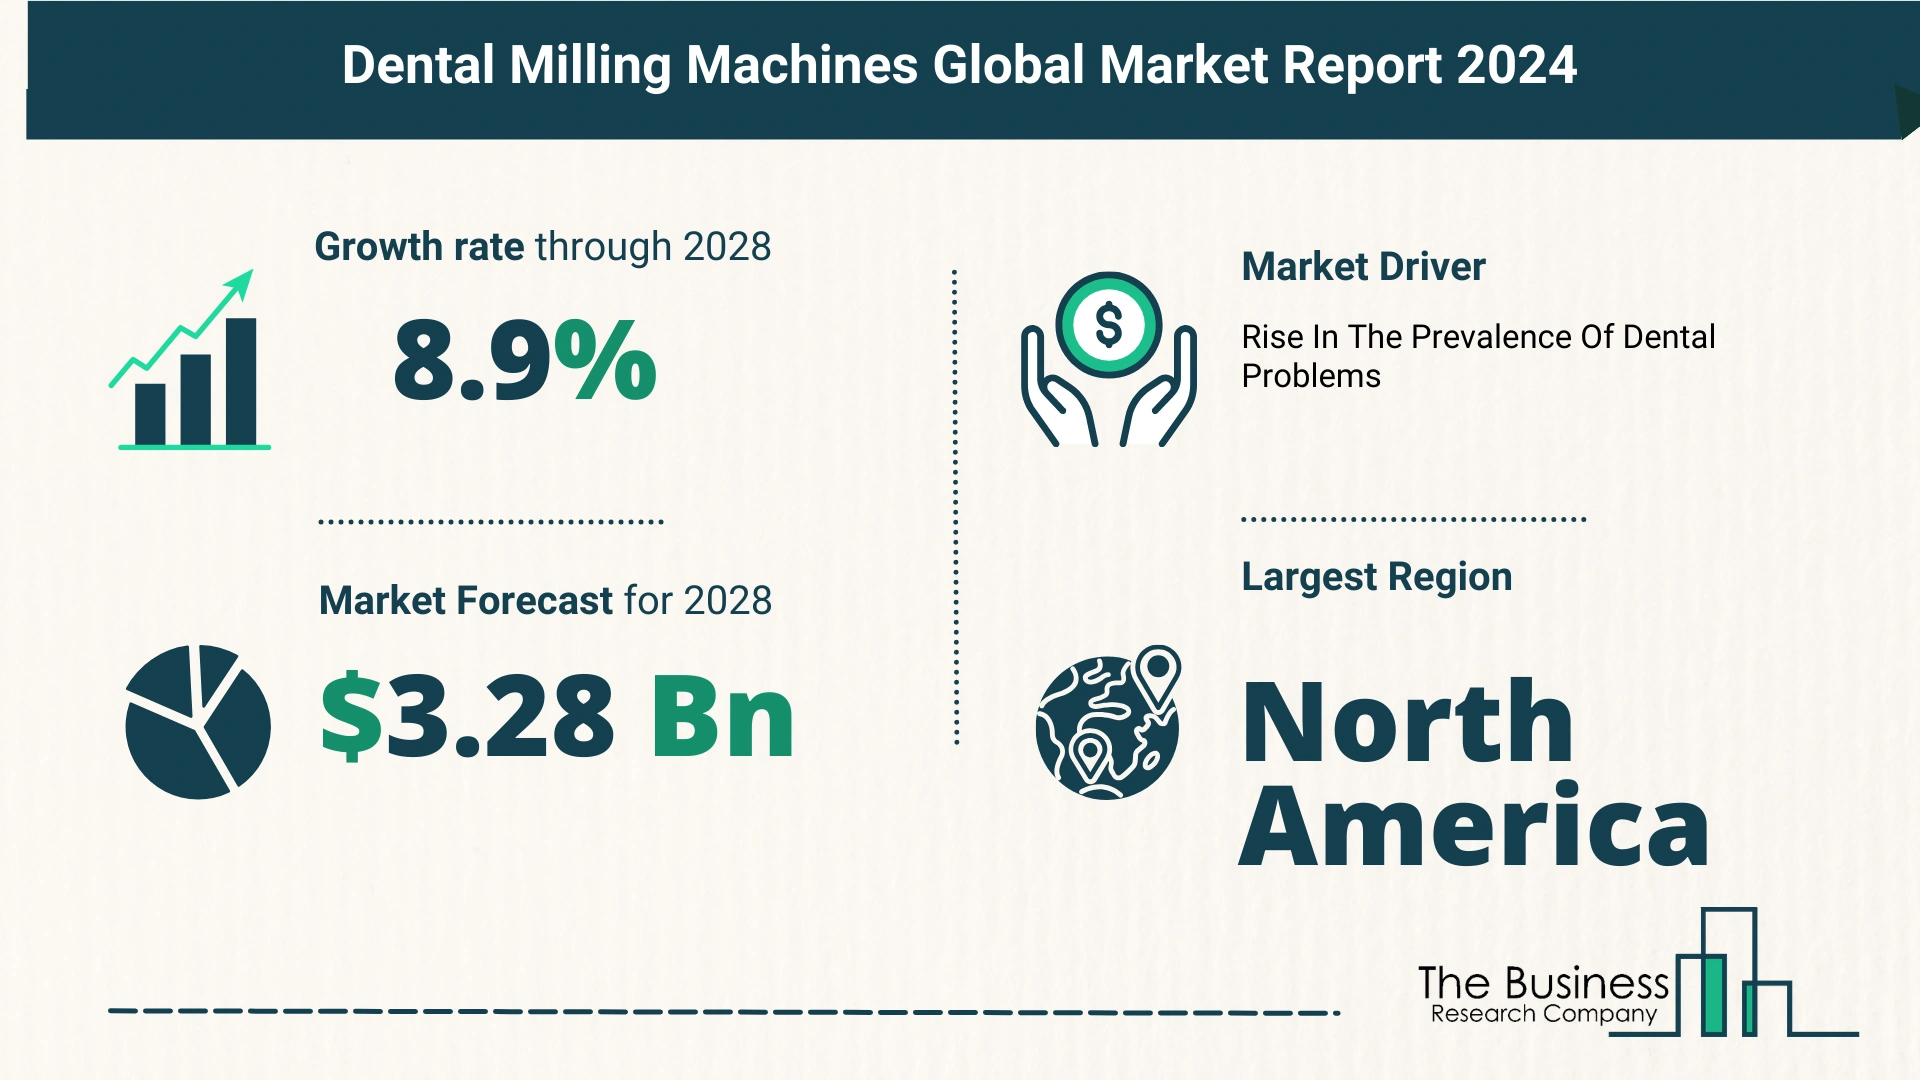 Top 5 Insights From The Dental Milling Machines Market Report 2024